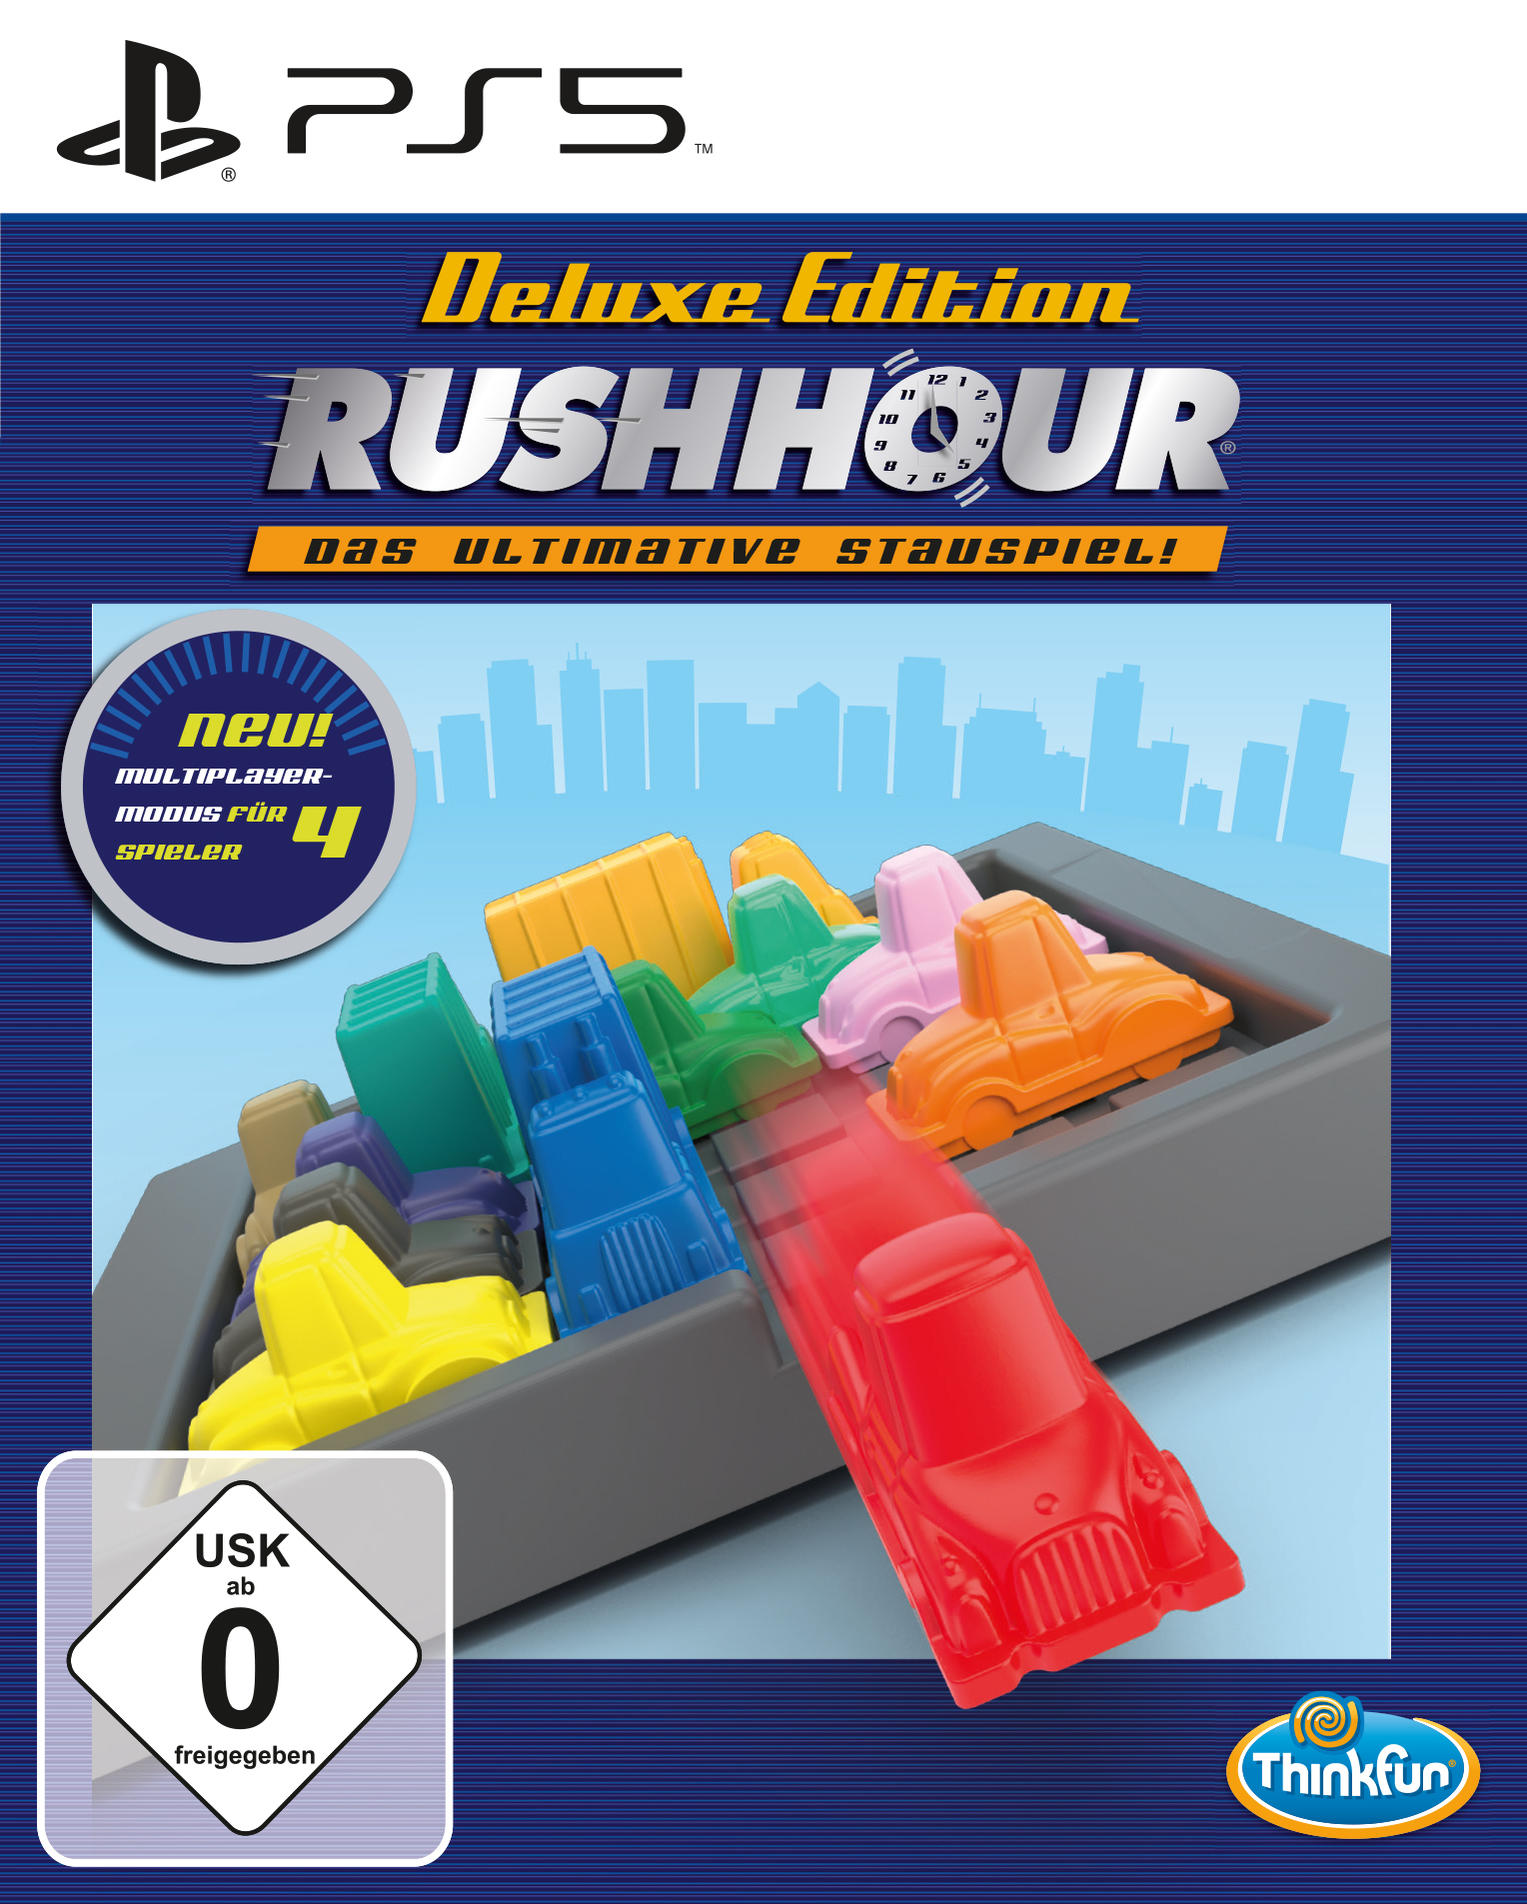 [PlayStation - Hour 5] - Deluxe Edition Rush